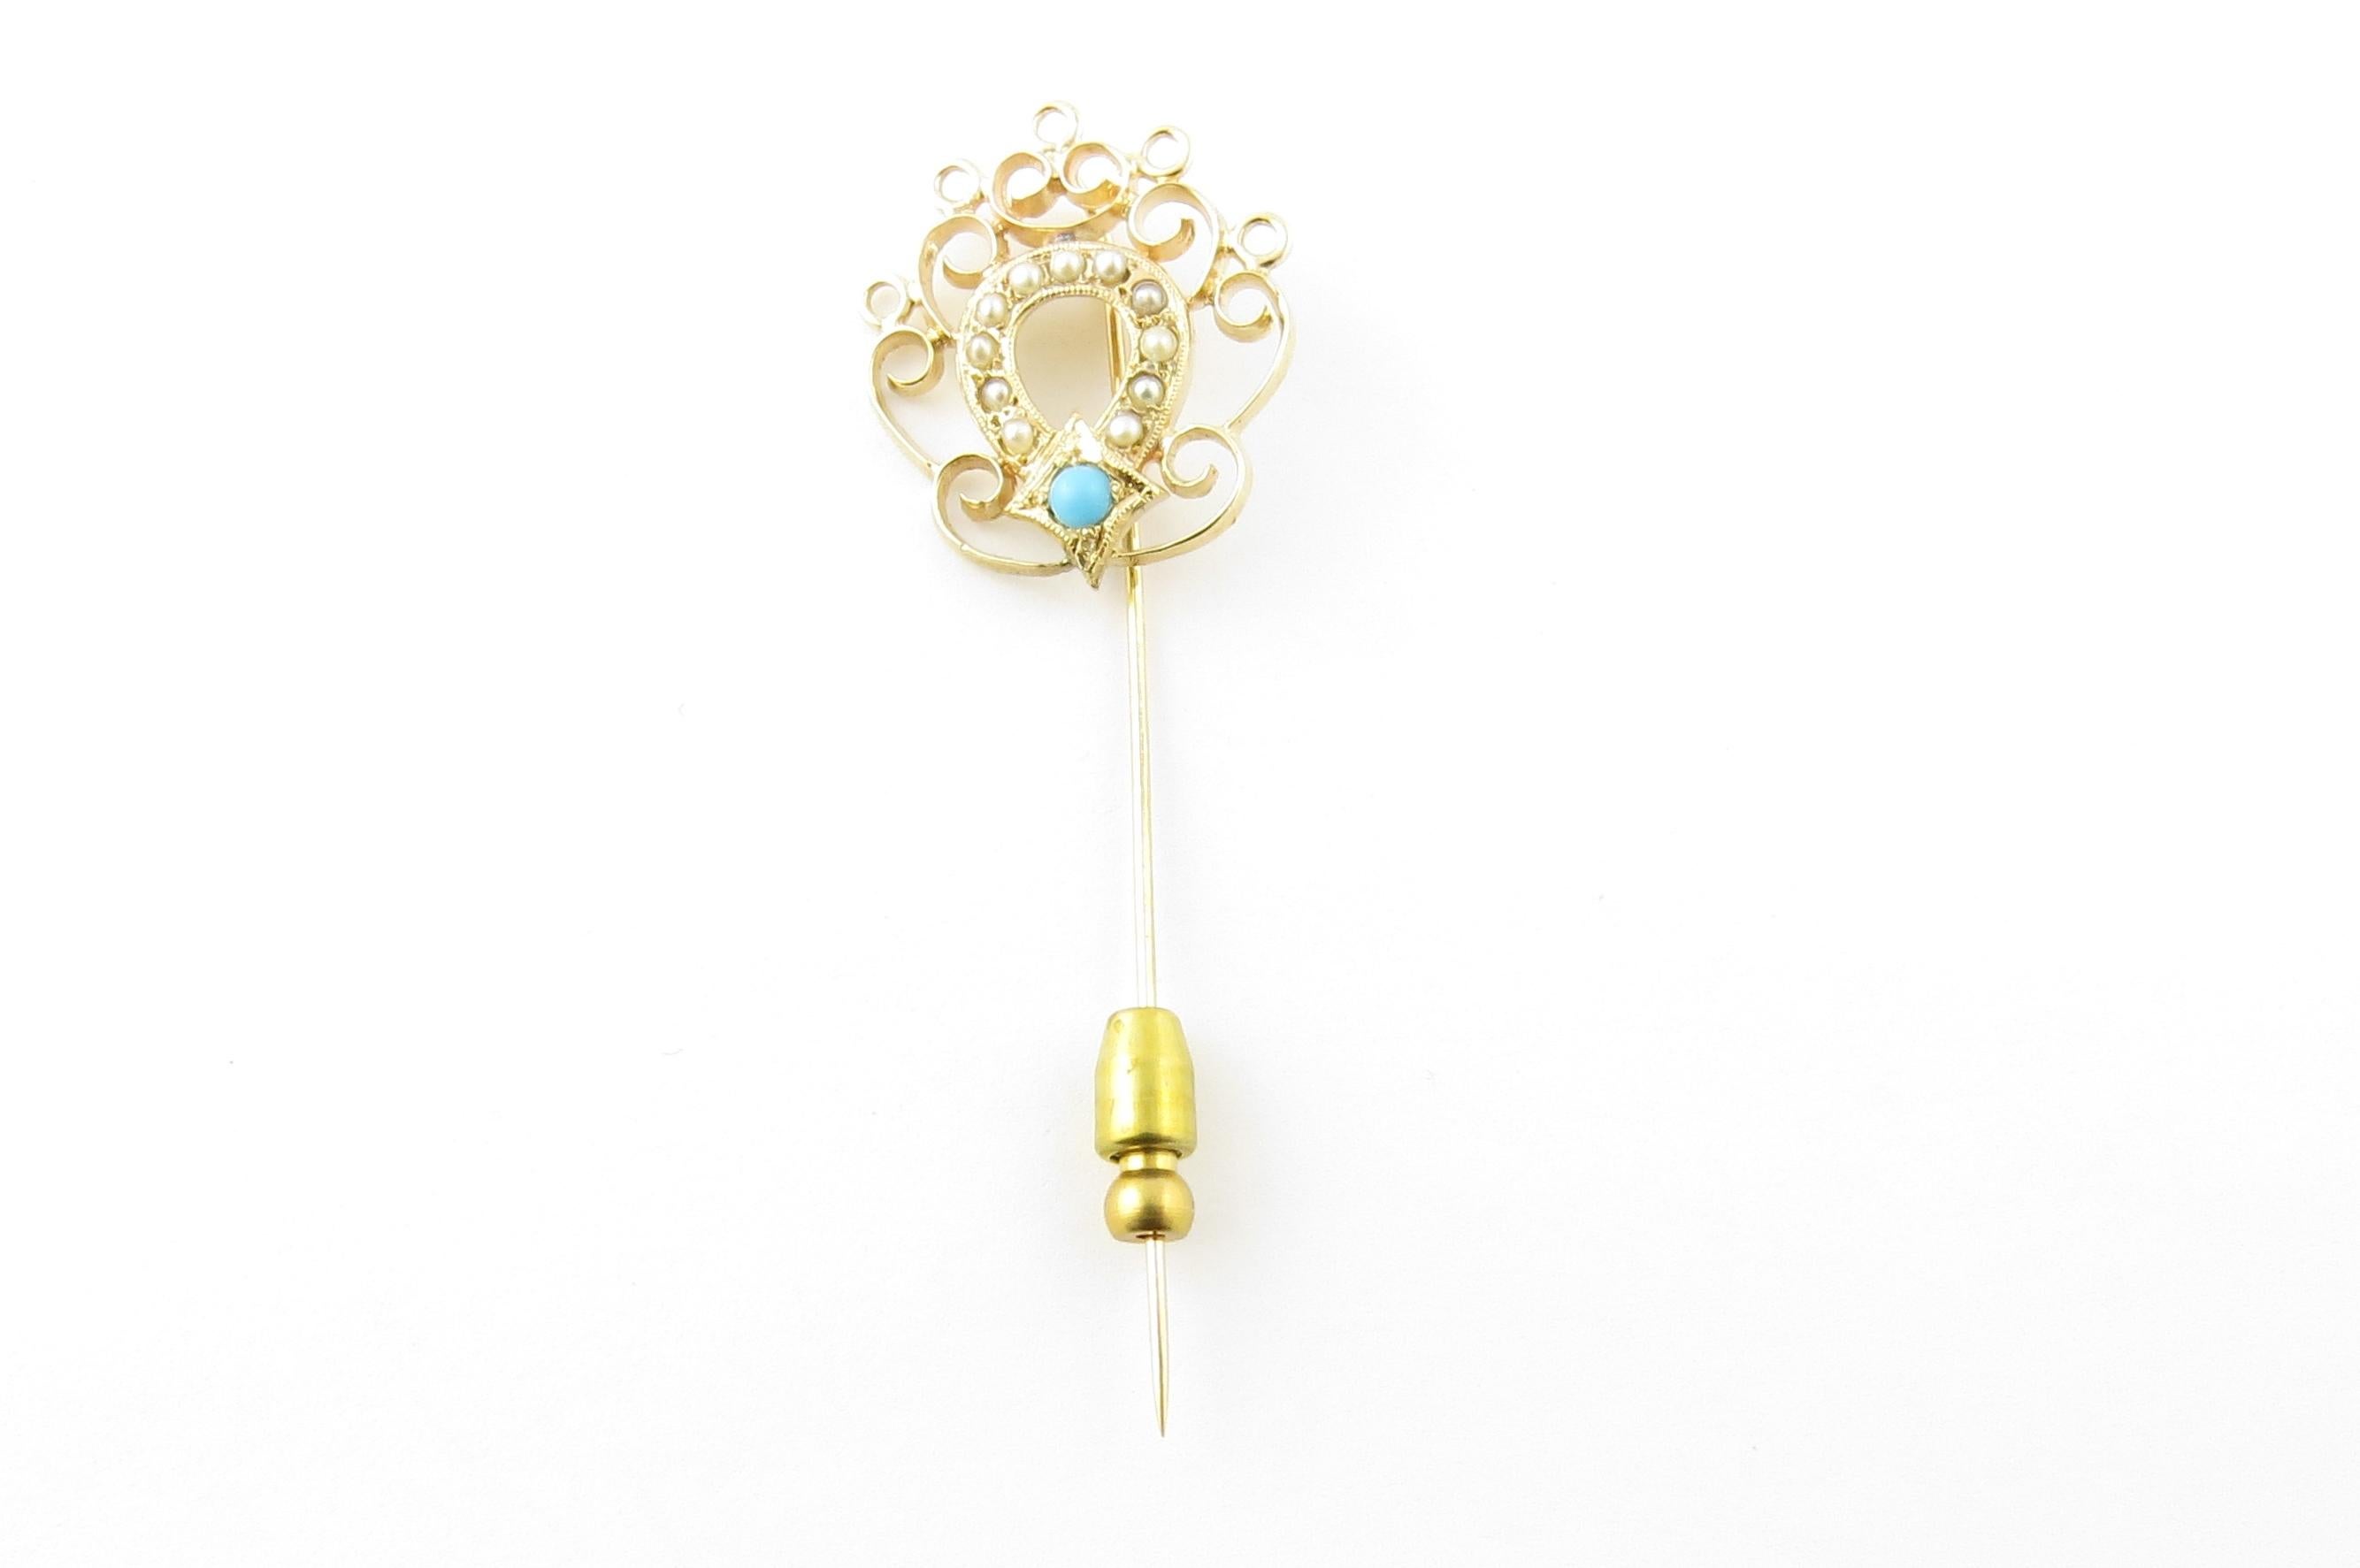 Vintage 14 Karat Yellow Gold Turquoise and Seed Pearl Stick Pin

This elegant stick pin features 1 round turquoise stone and 11 seed pearls set in beautifully detailed 14K yellow gold. Top of pin measures 24 mm x 21 mm.

Size: 60 mm

Weight: 1.5